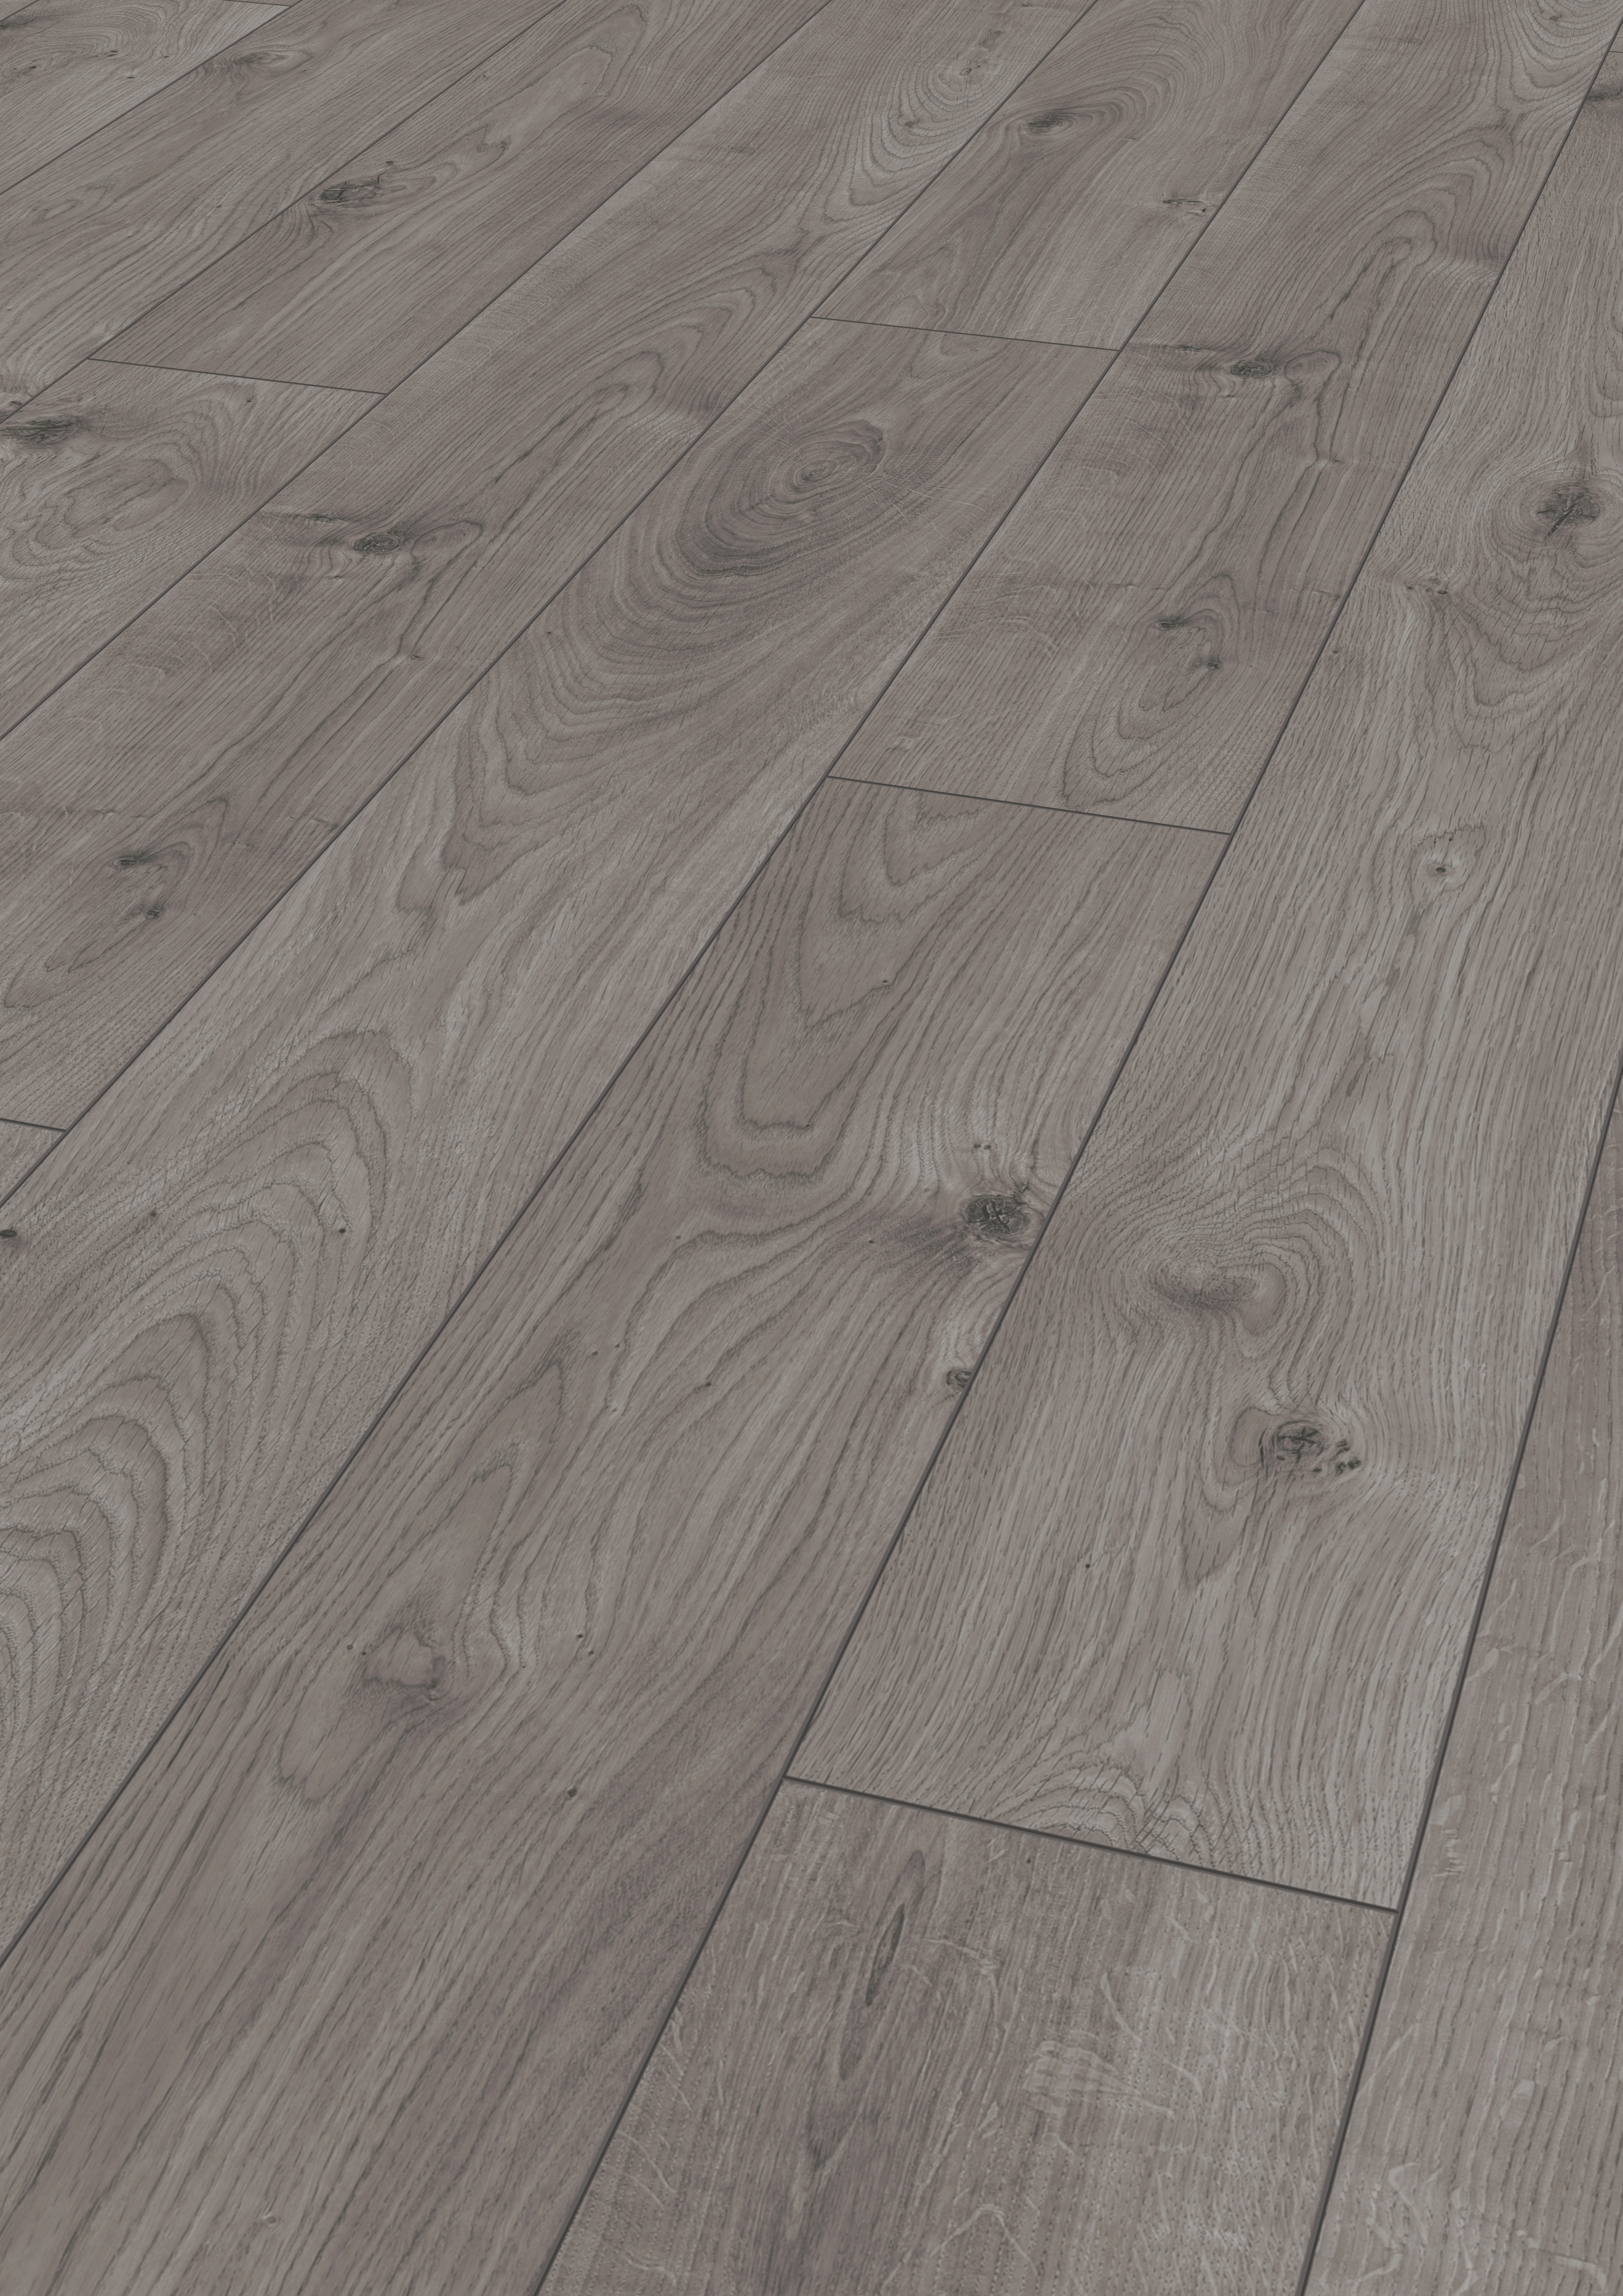 Hardwood Floors Magazine Digital issue Of Mammut Laminate Flooring In Country House Plank Style Kronotex within Download Picture Amp